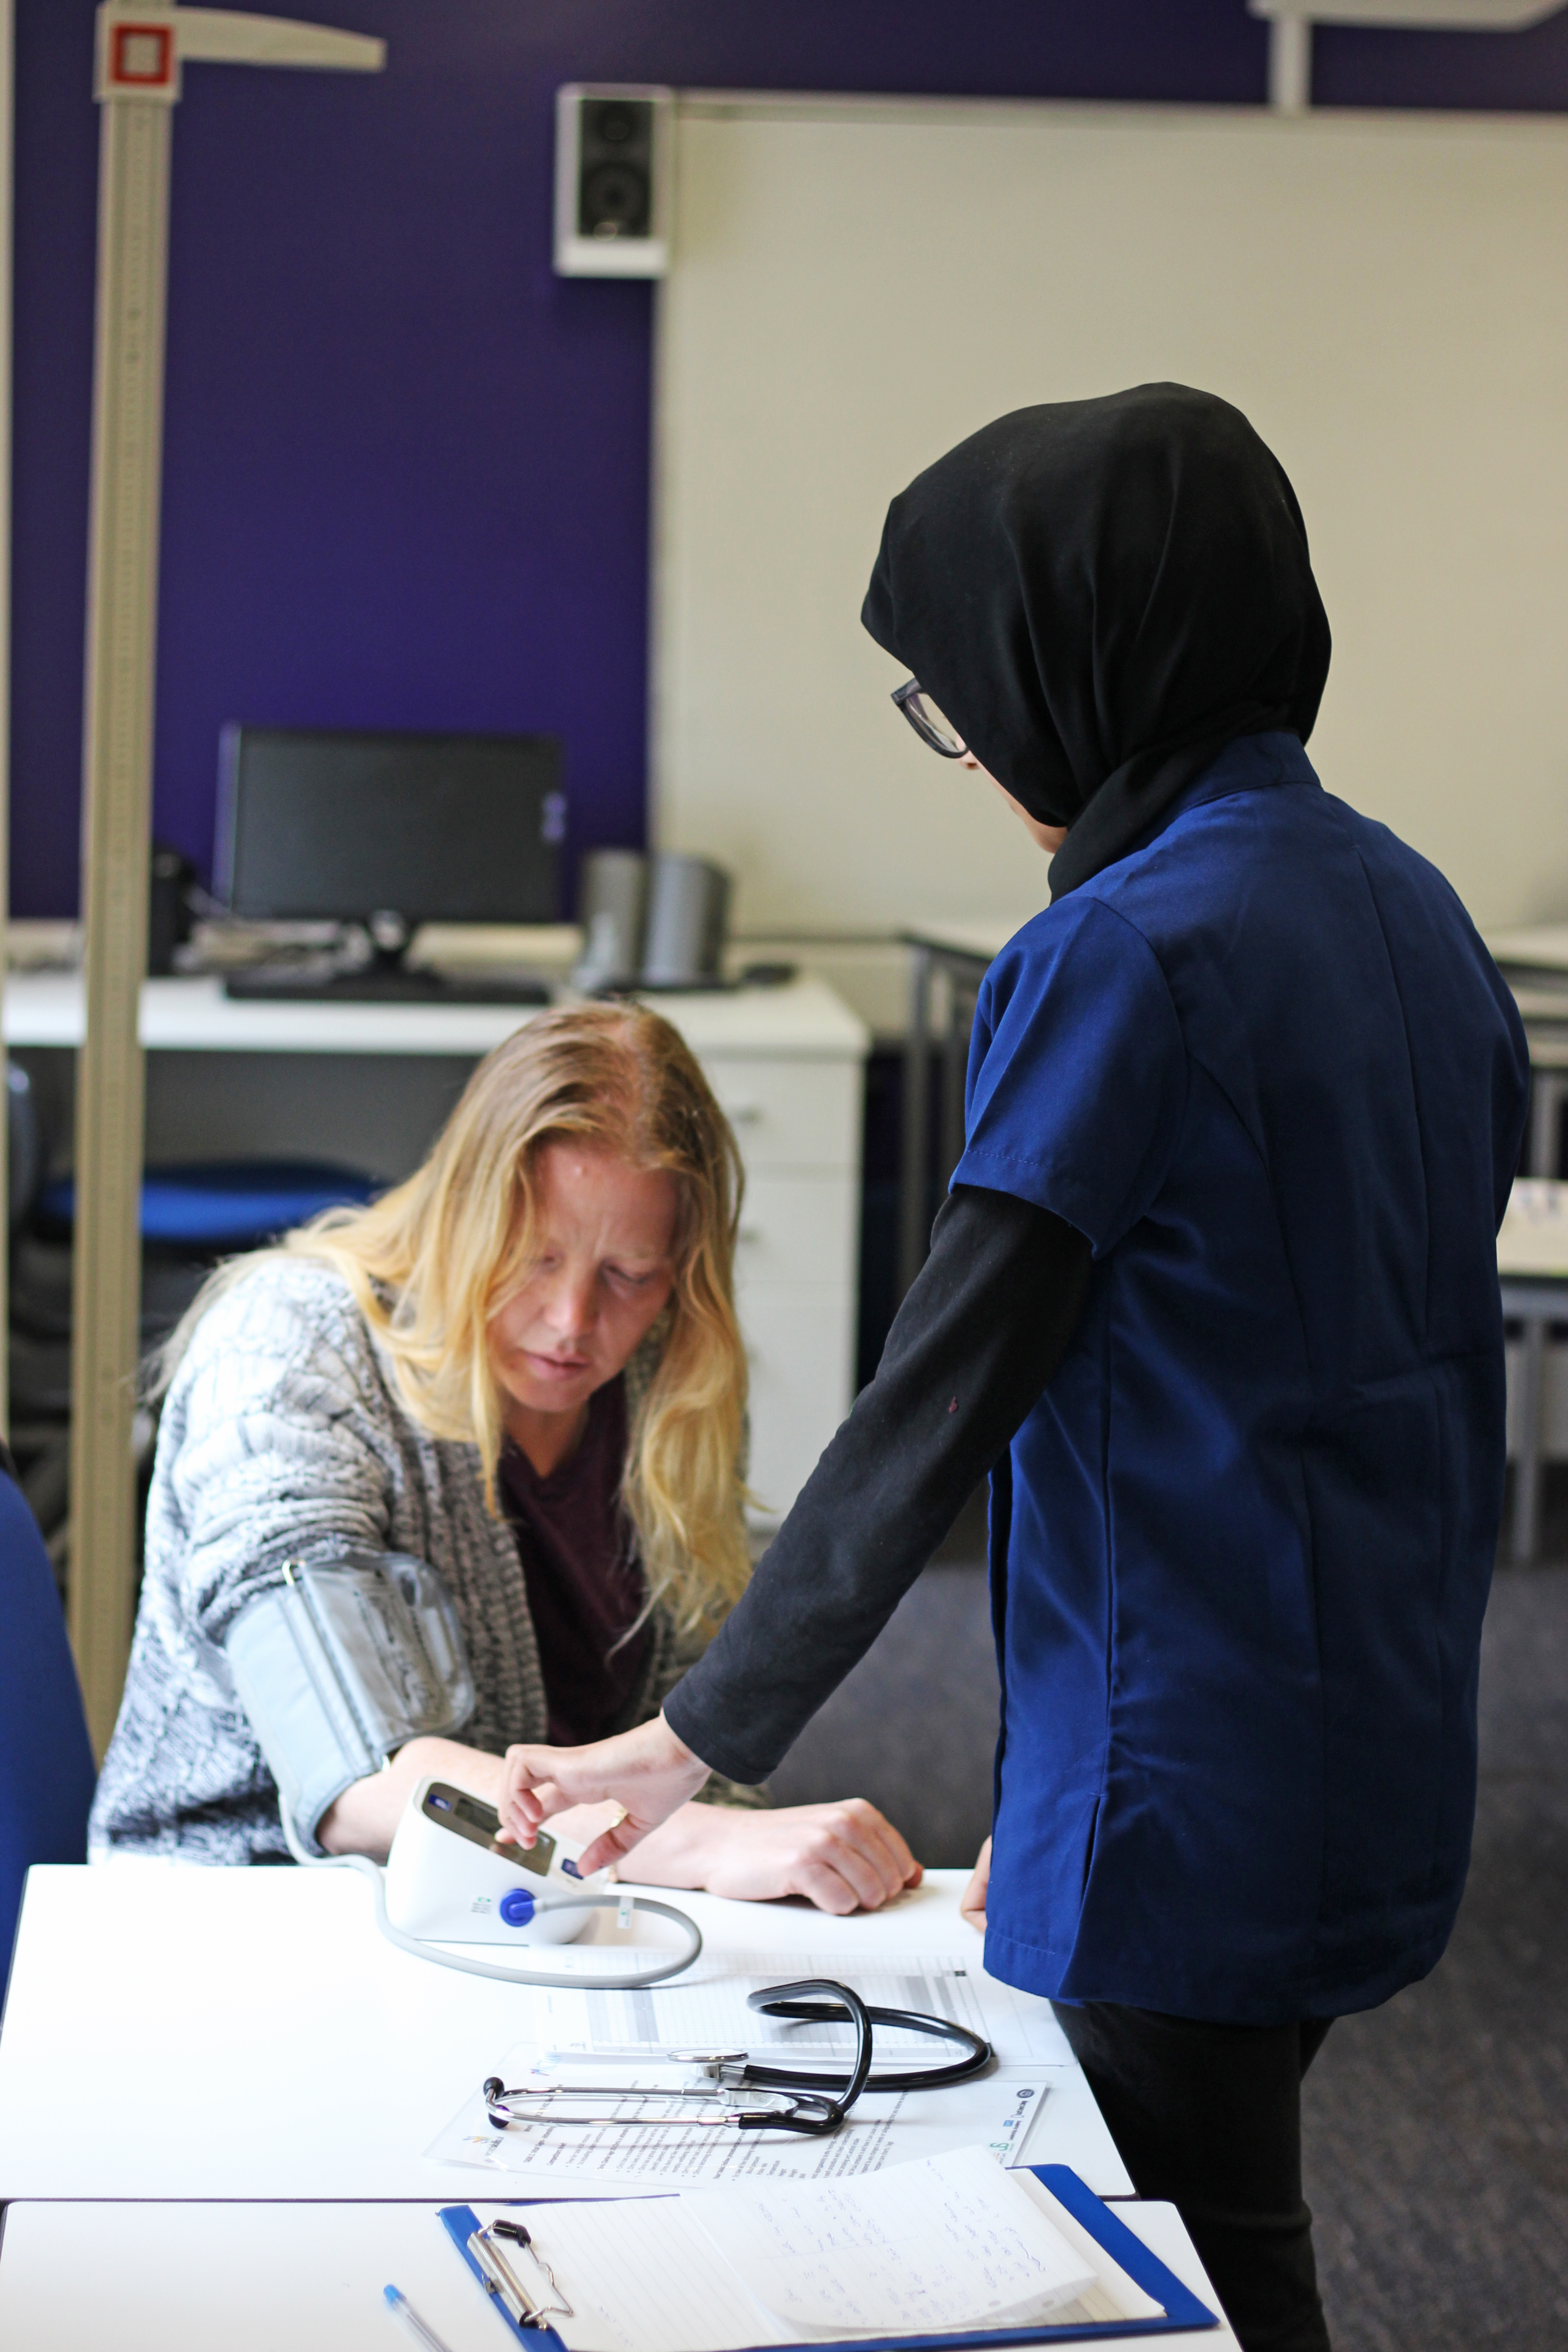 Student taking a patient's blood pressure during WorldSkills UK health and social care competition.